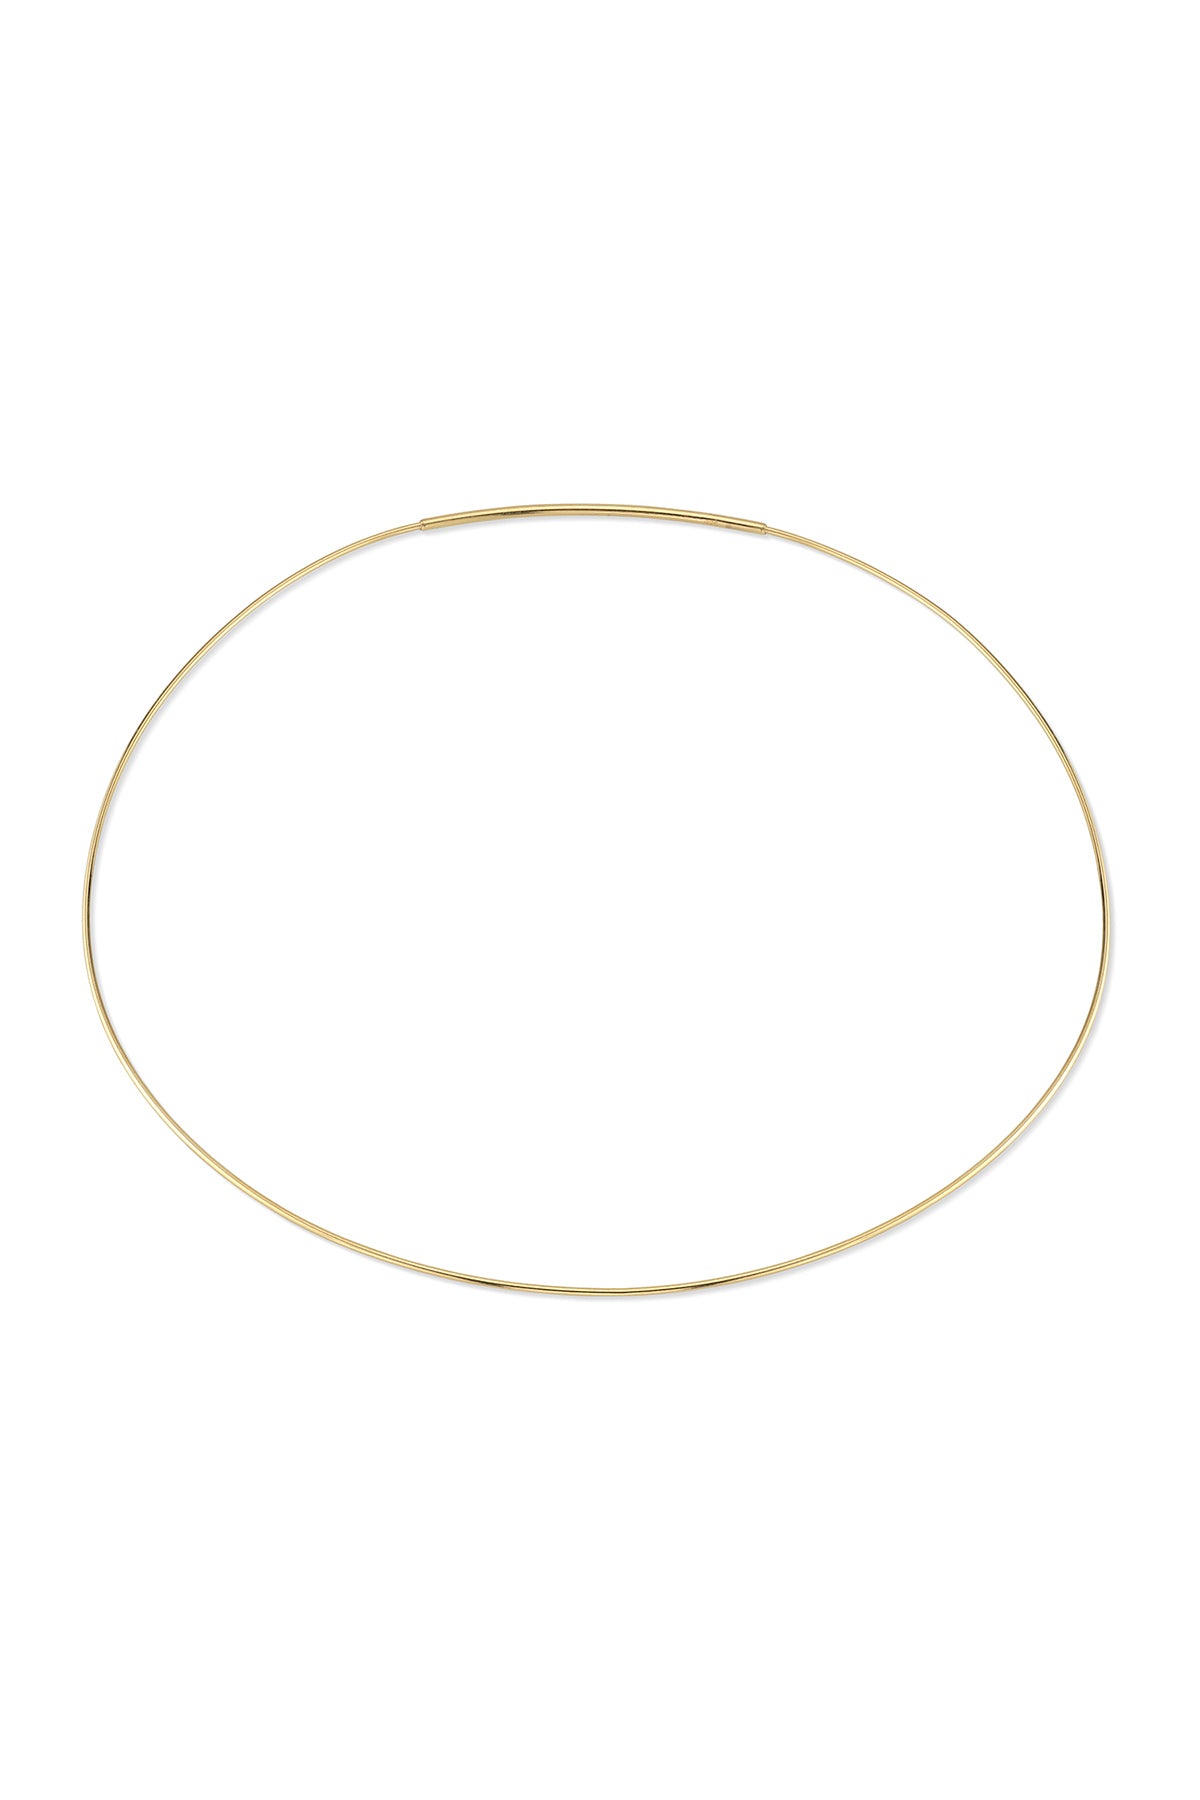   CRESCENT COLLAR IN GOLD BY SLOAN 